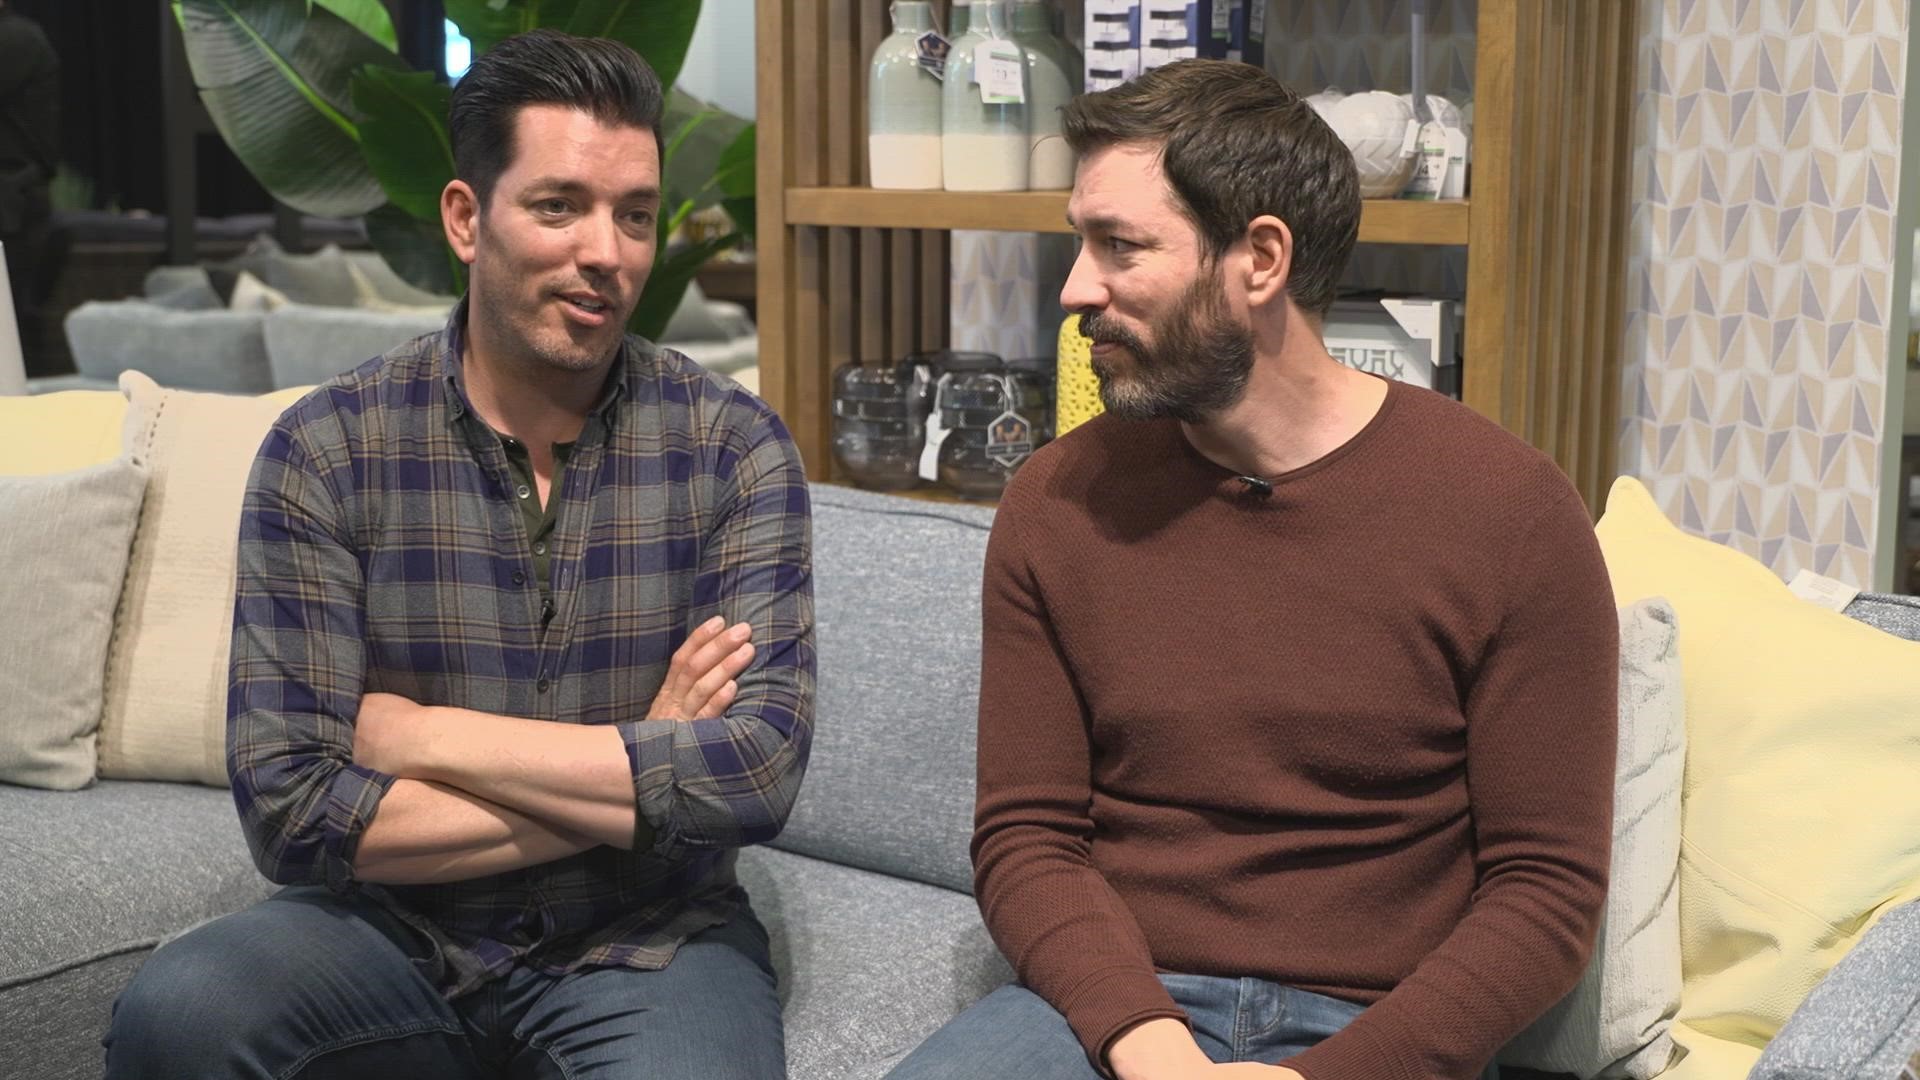 HGTV stars Jonathan and Drew Scott sit down with WFAA's Kara Sewell for a discussion that ranges from their new furniture line to their earliest days on television.